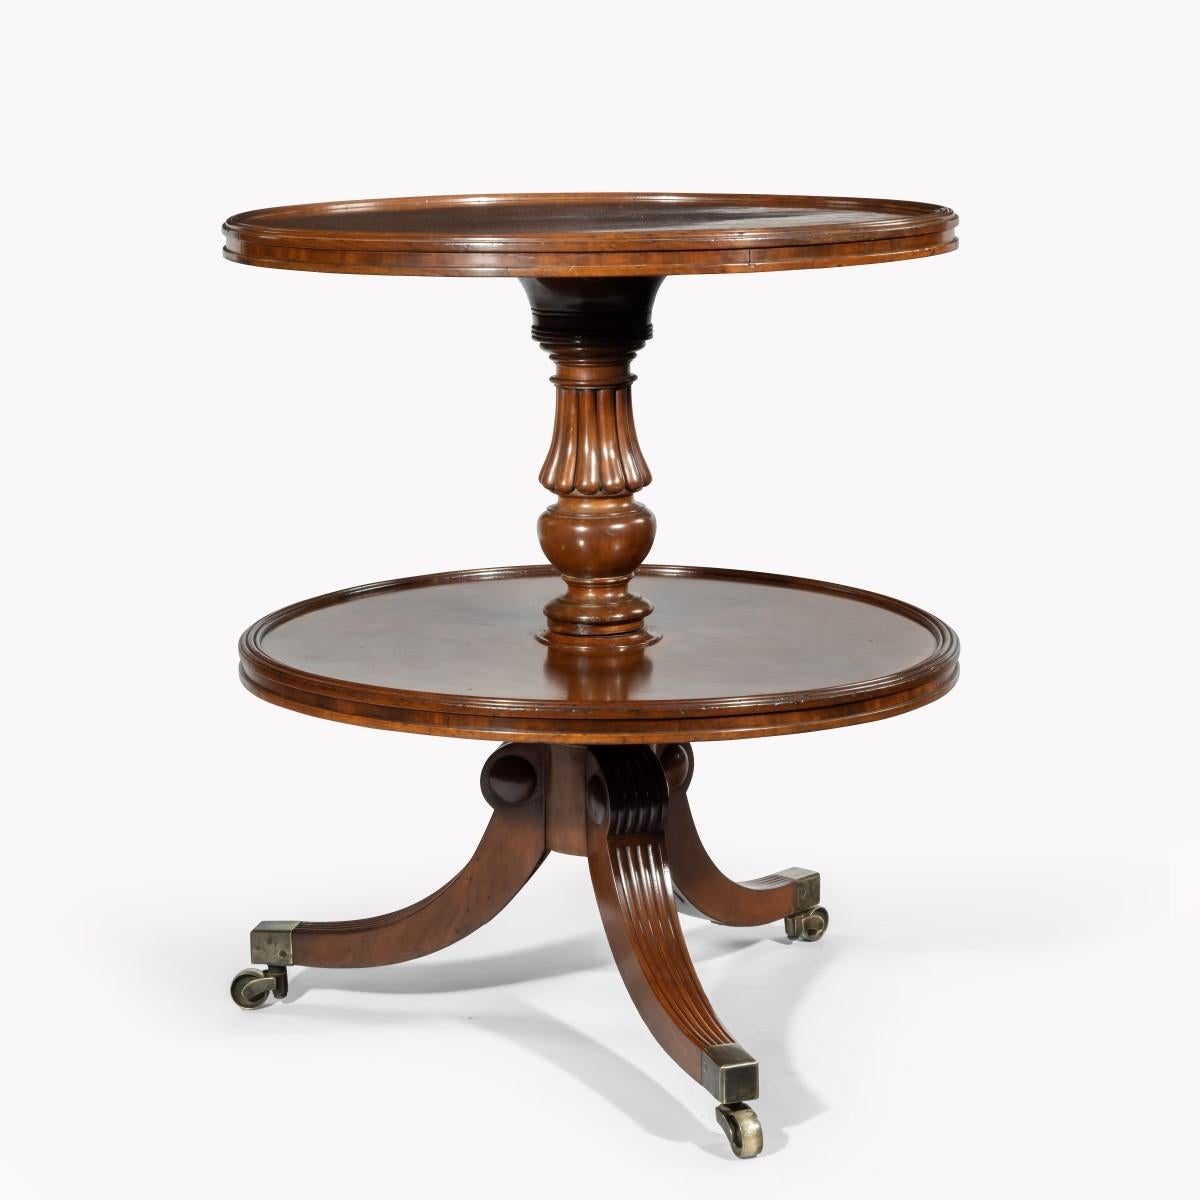 English William IV Two Tier Mahogany Table Attribruted to Gillows For Sale